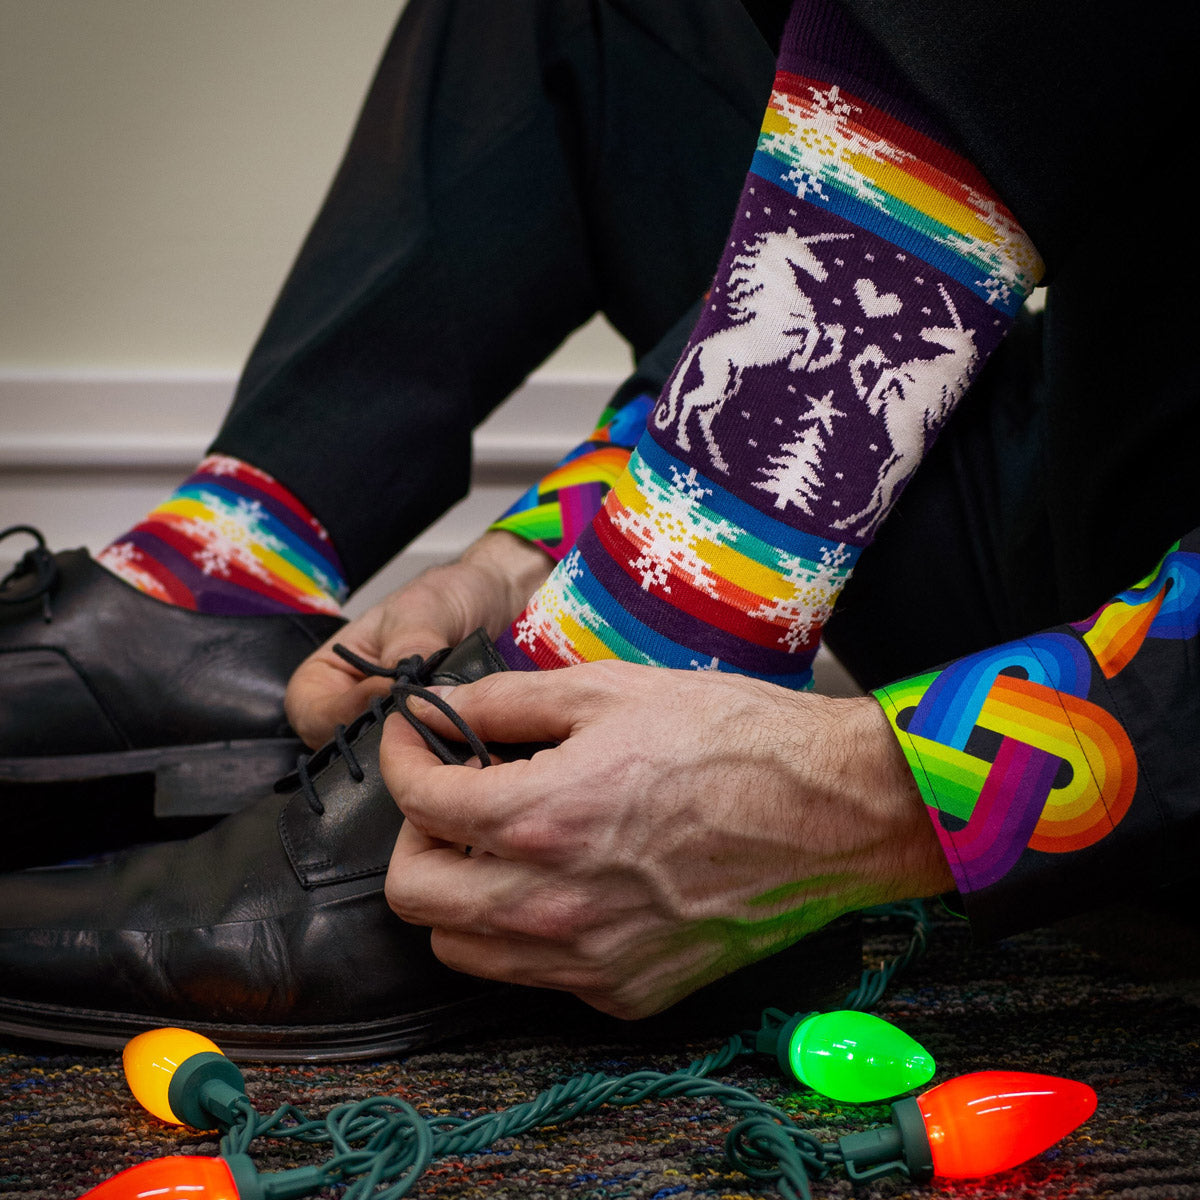 A man wears purple and rainbow Christmas socks that perfectly coordinate with his purple and rainbow shirt